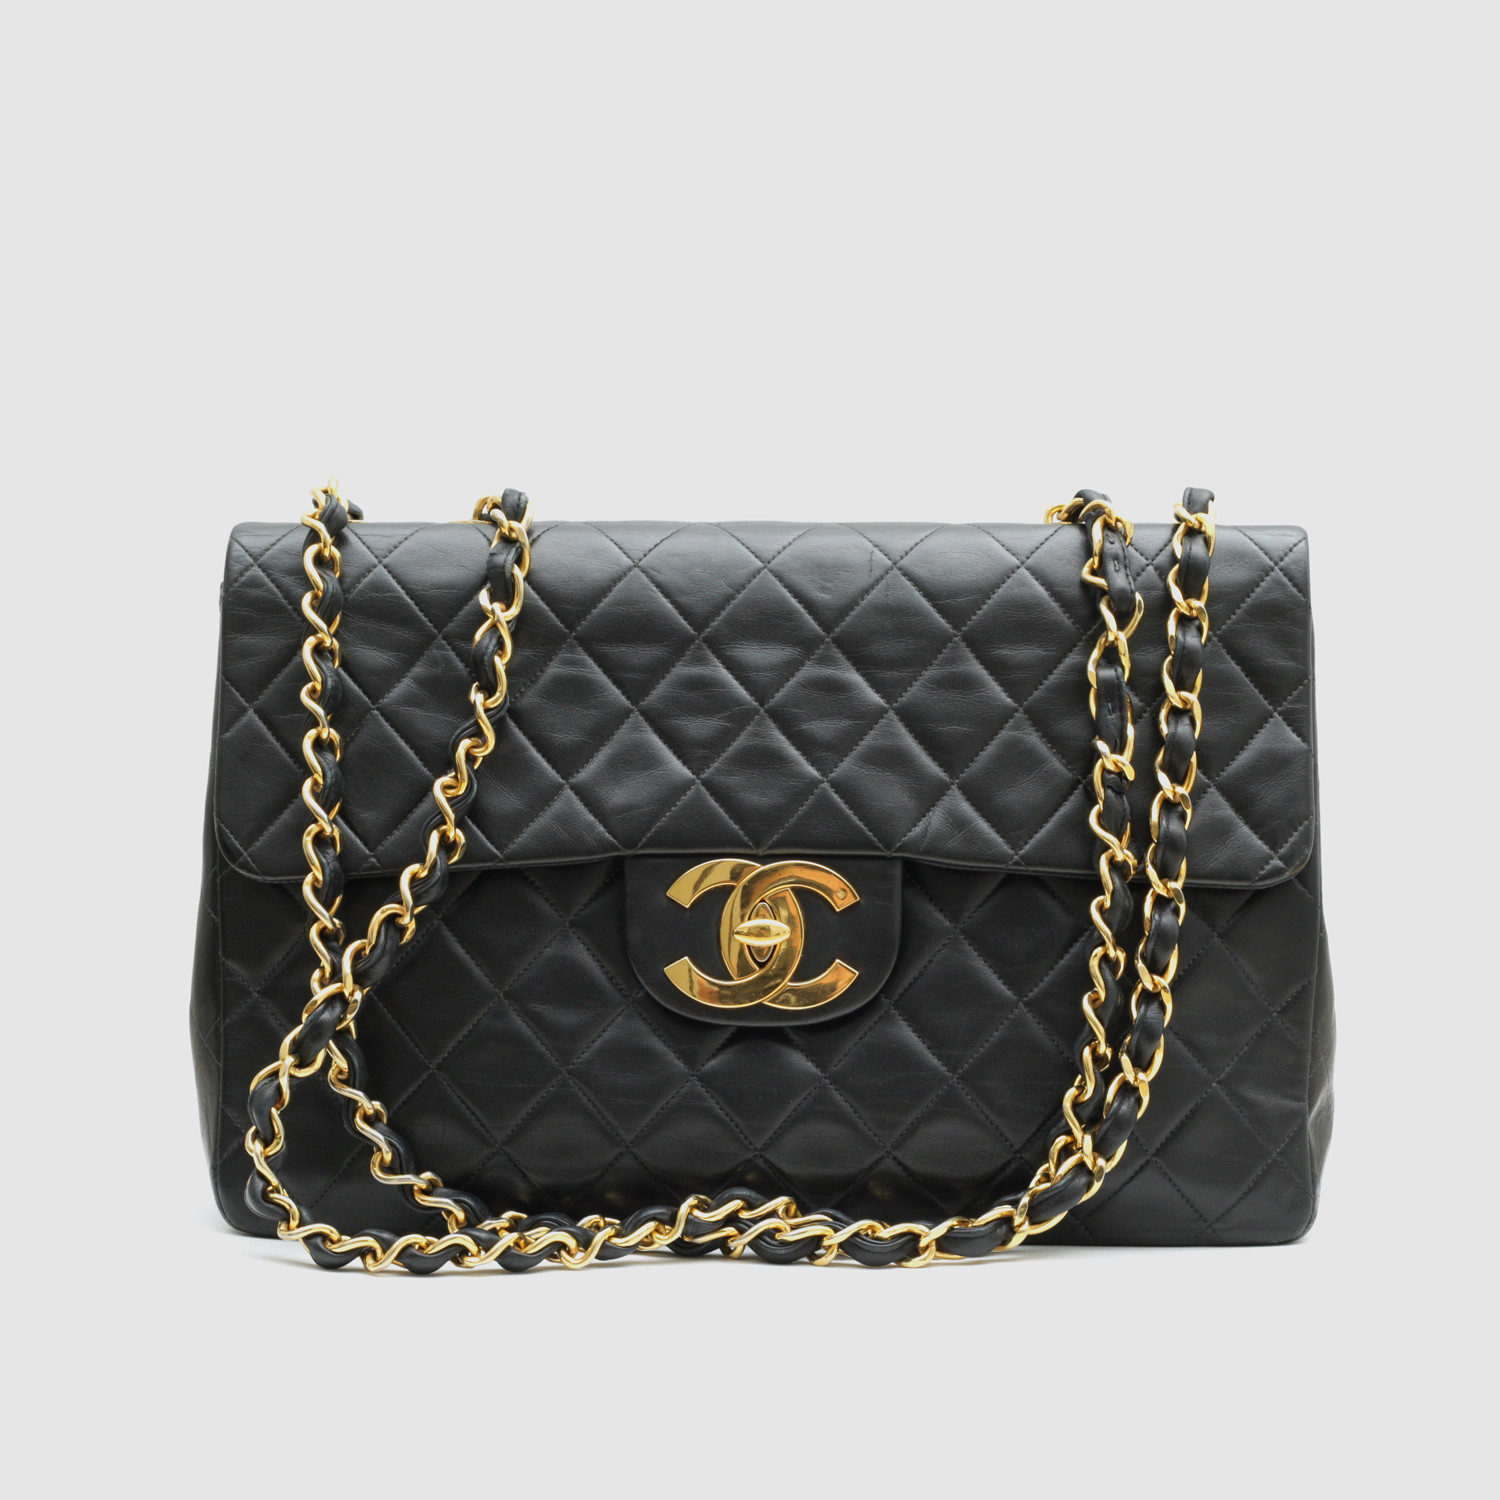 Chanel Classic Large Jumbo Flap Bag // Black Quilted Lambskin - Vintage Luxury Handbags - Touch ...